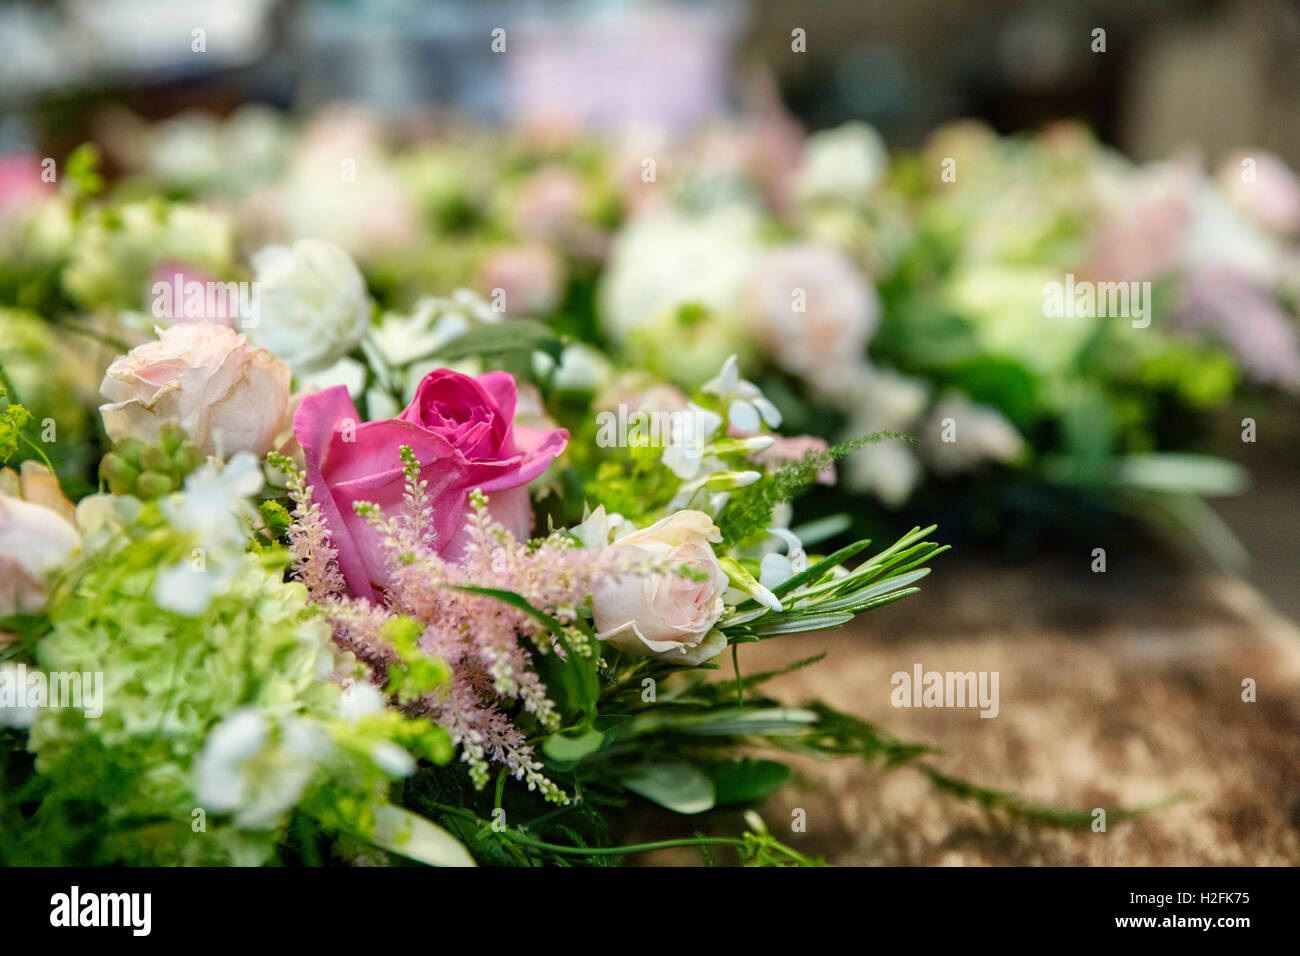 Close up of arrangements on  a workbench. Pink and white flowers with green foliage. Stock Photo